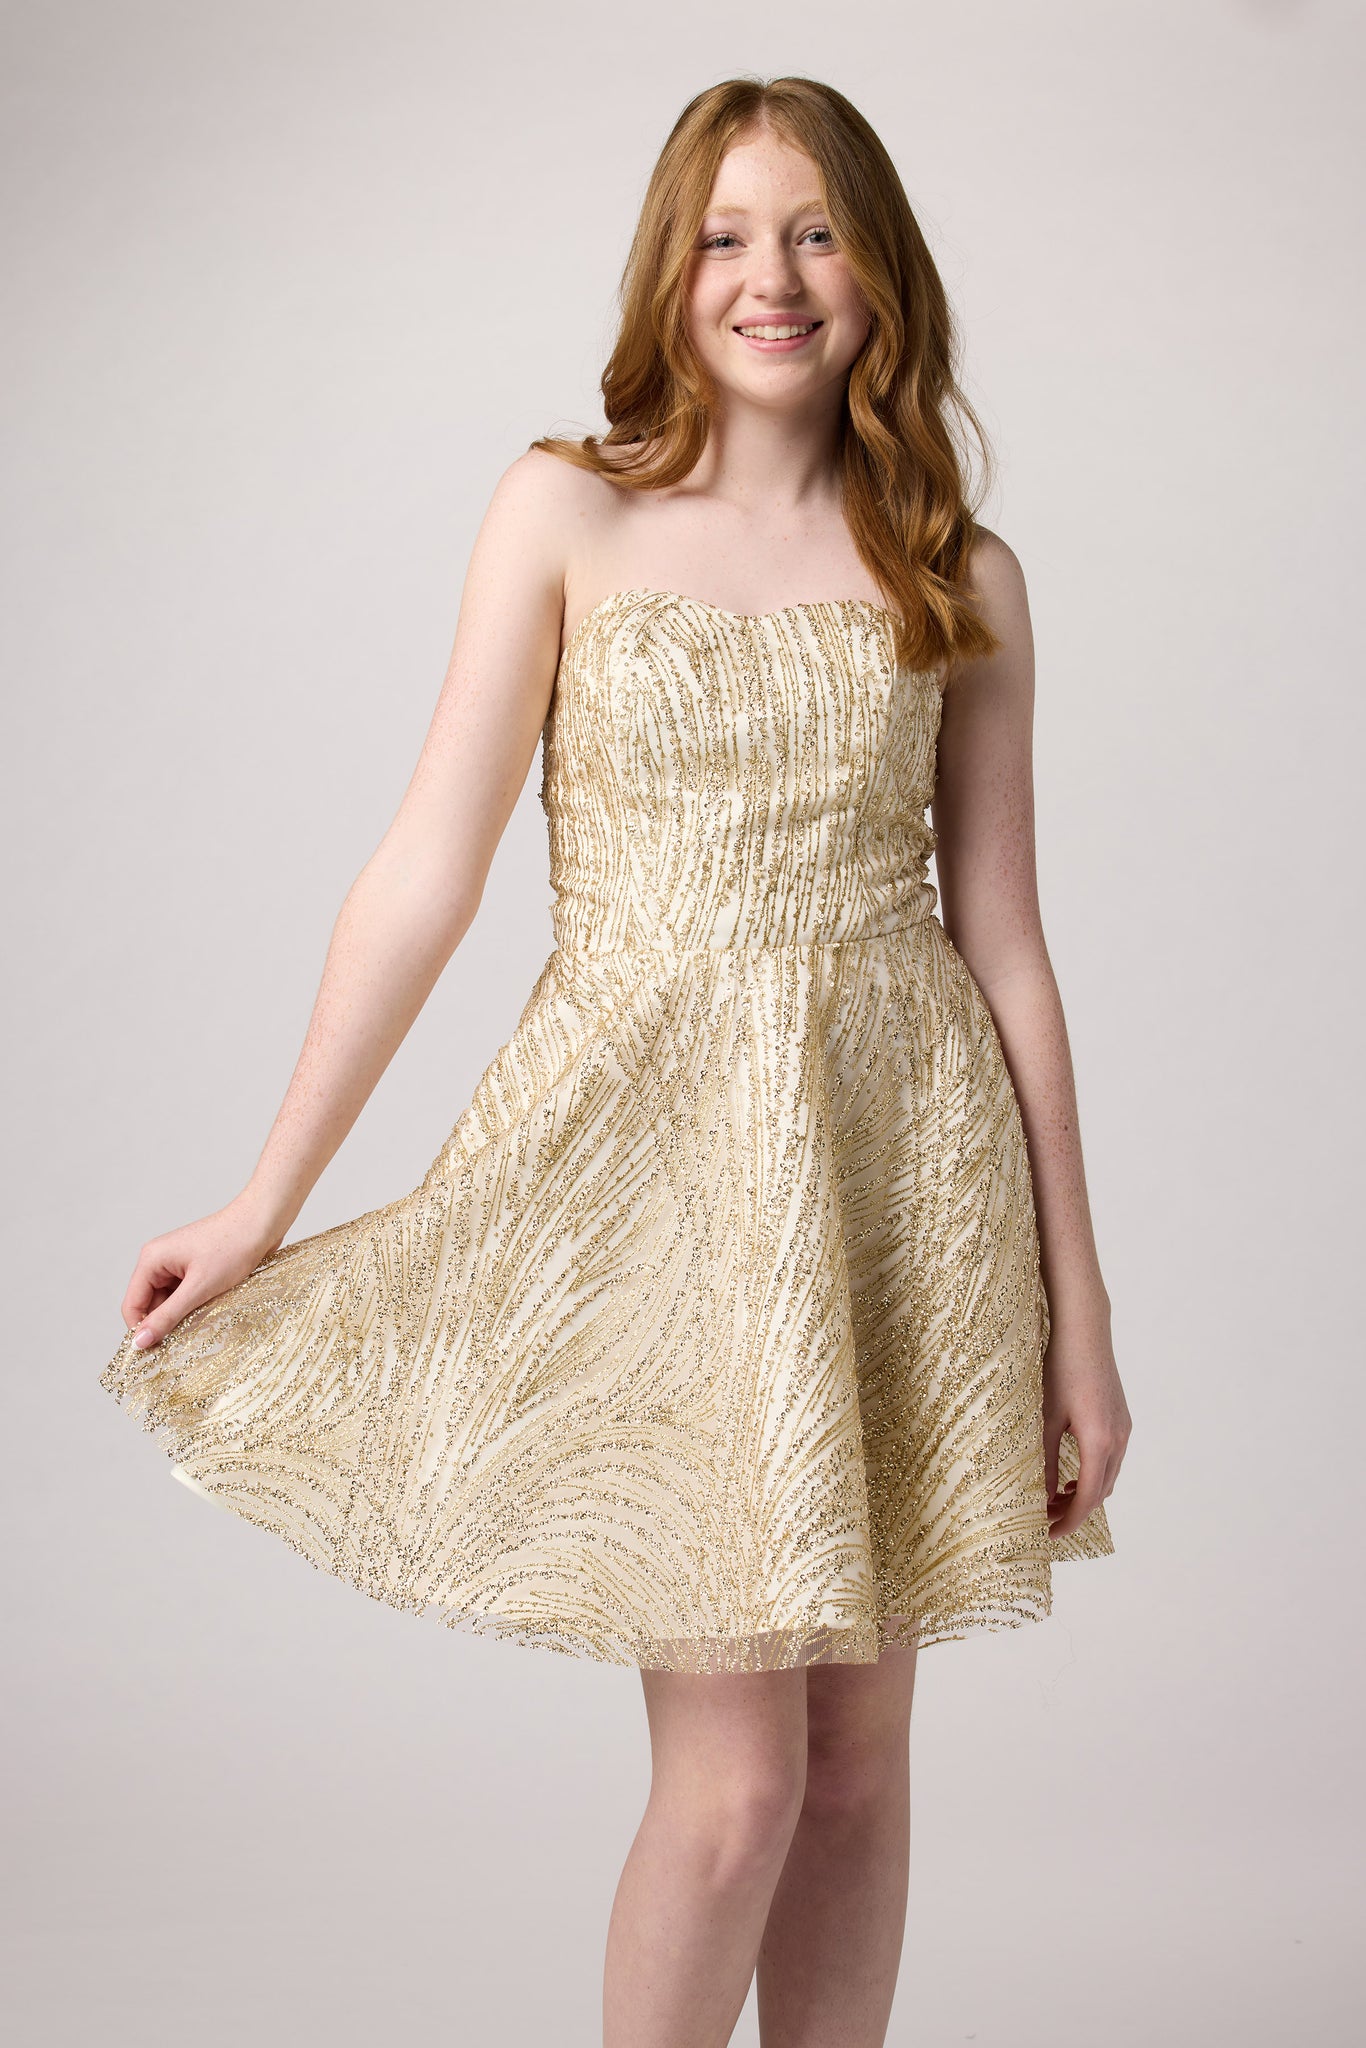 Red head girl in a gold beaded dress.